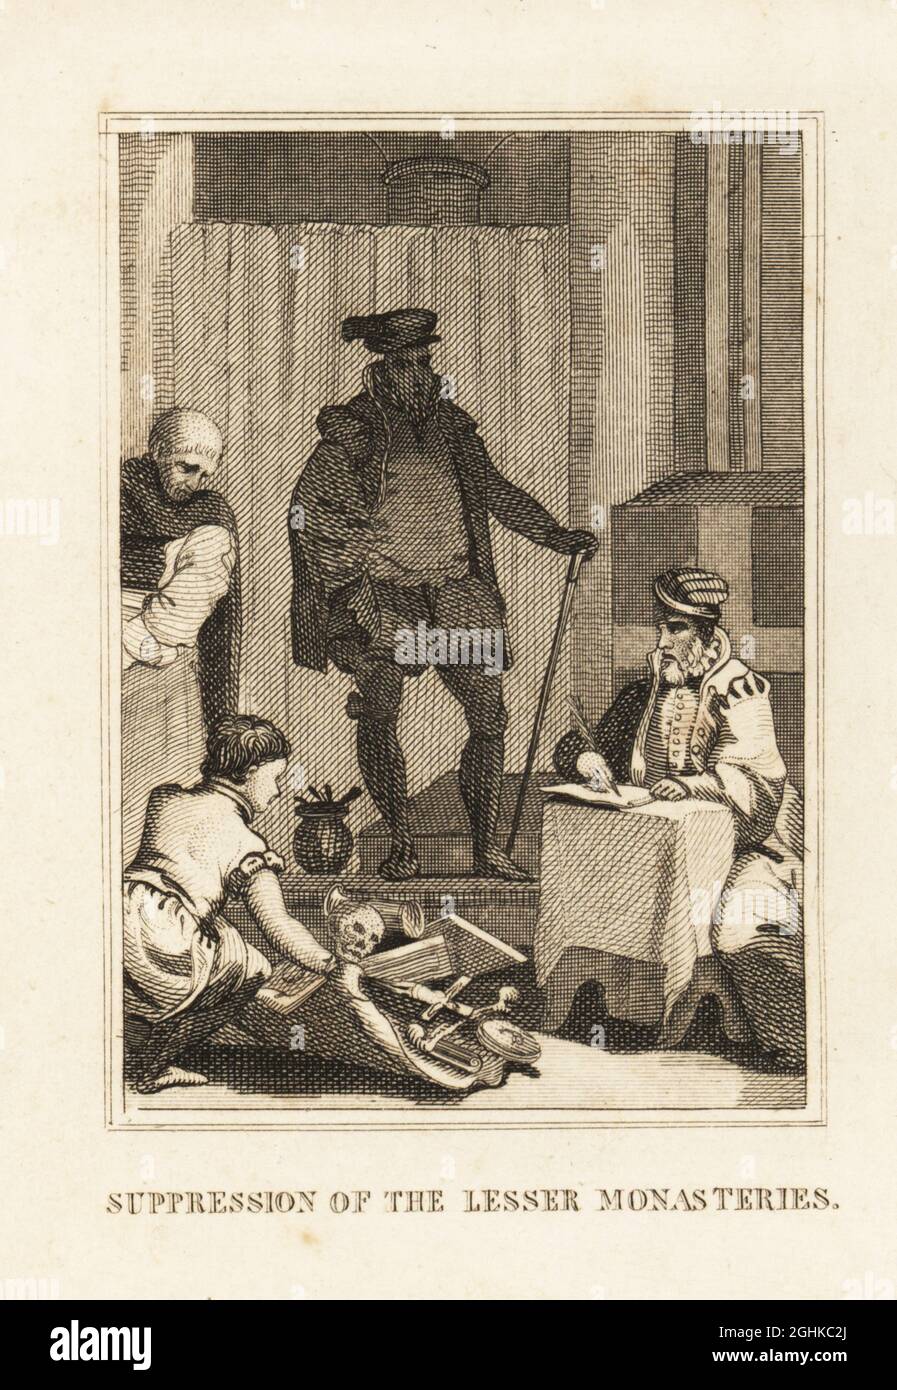 King Henry VIII overseeing the dissolution of the Catholic monasteries, 1536-41. A boy steals relics, gold, crucifix, and other booty in front of a clerk and a monk. Suppression of the lesser monasteries. Copperplate engraving from M. A. Jones’ History of England from Julius Caesar to George IV, G. Virtue, 26 Ivy Lane, London, 1836. Stock Photo